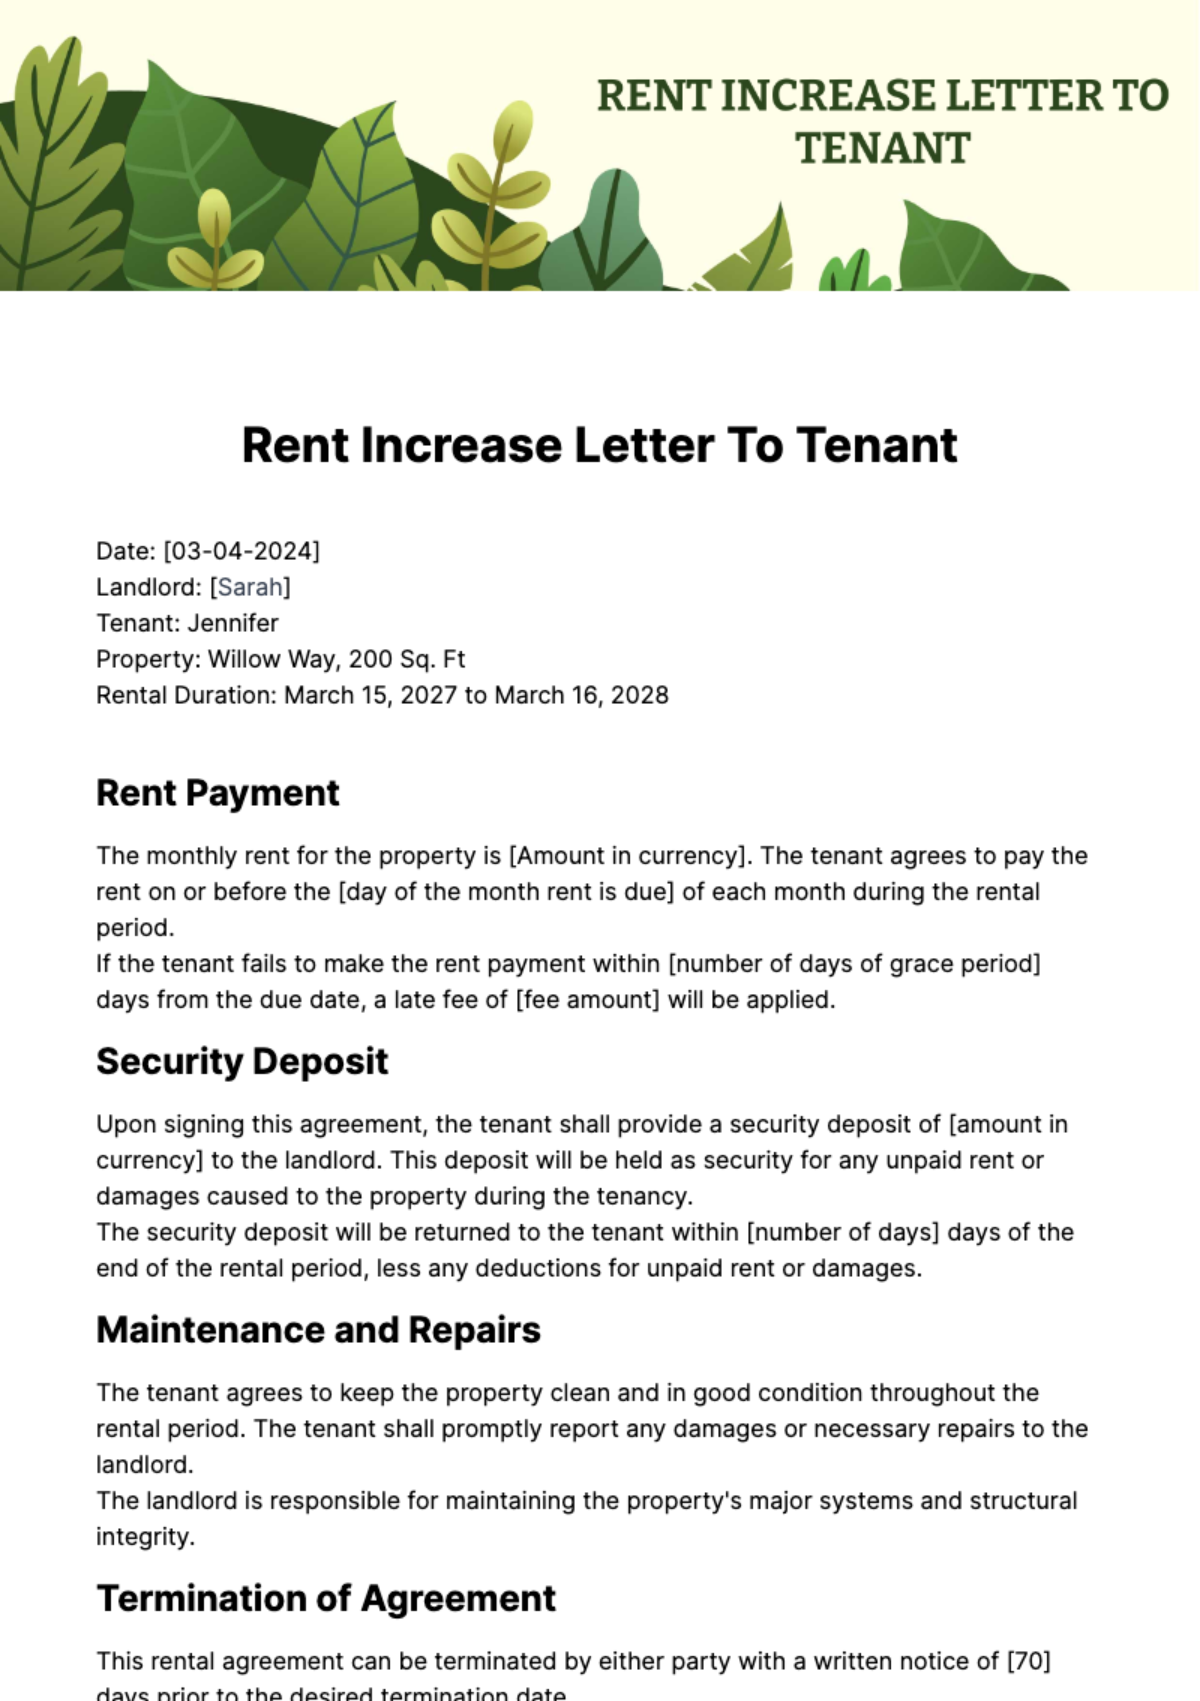 Rent Increase Letter to Tenant Template